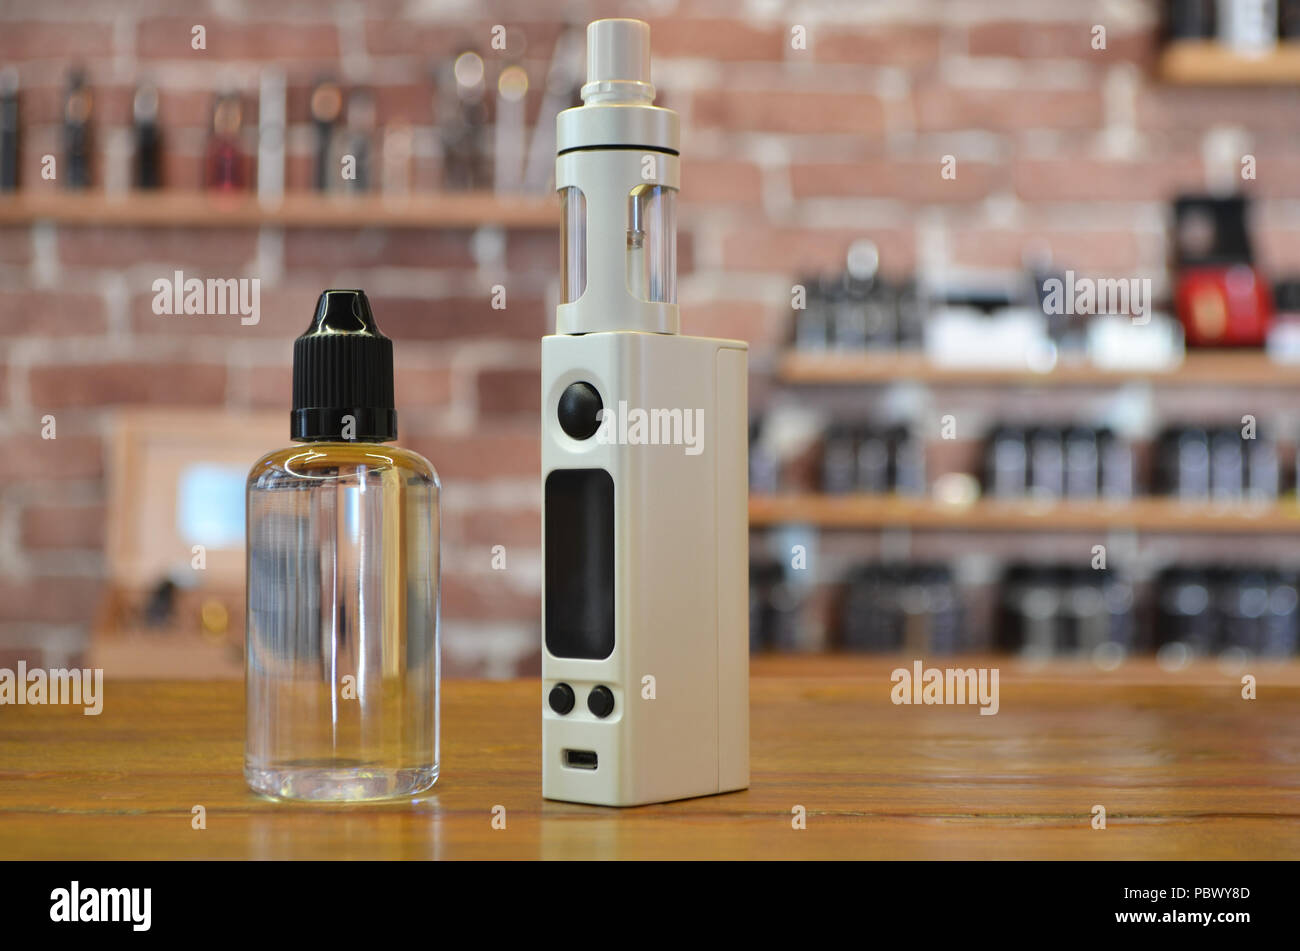 Electronic cigarette with ejuice bottle on a background of vape shop. E-cigarette for vaping. Popular vape devices Stock Photo